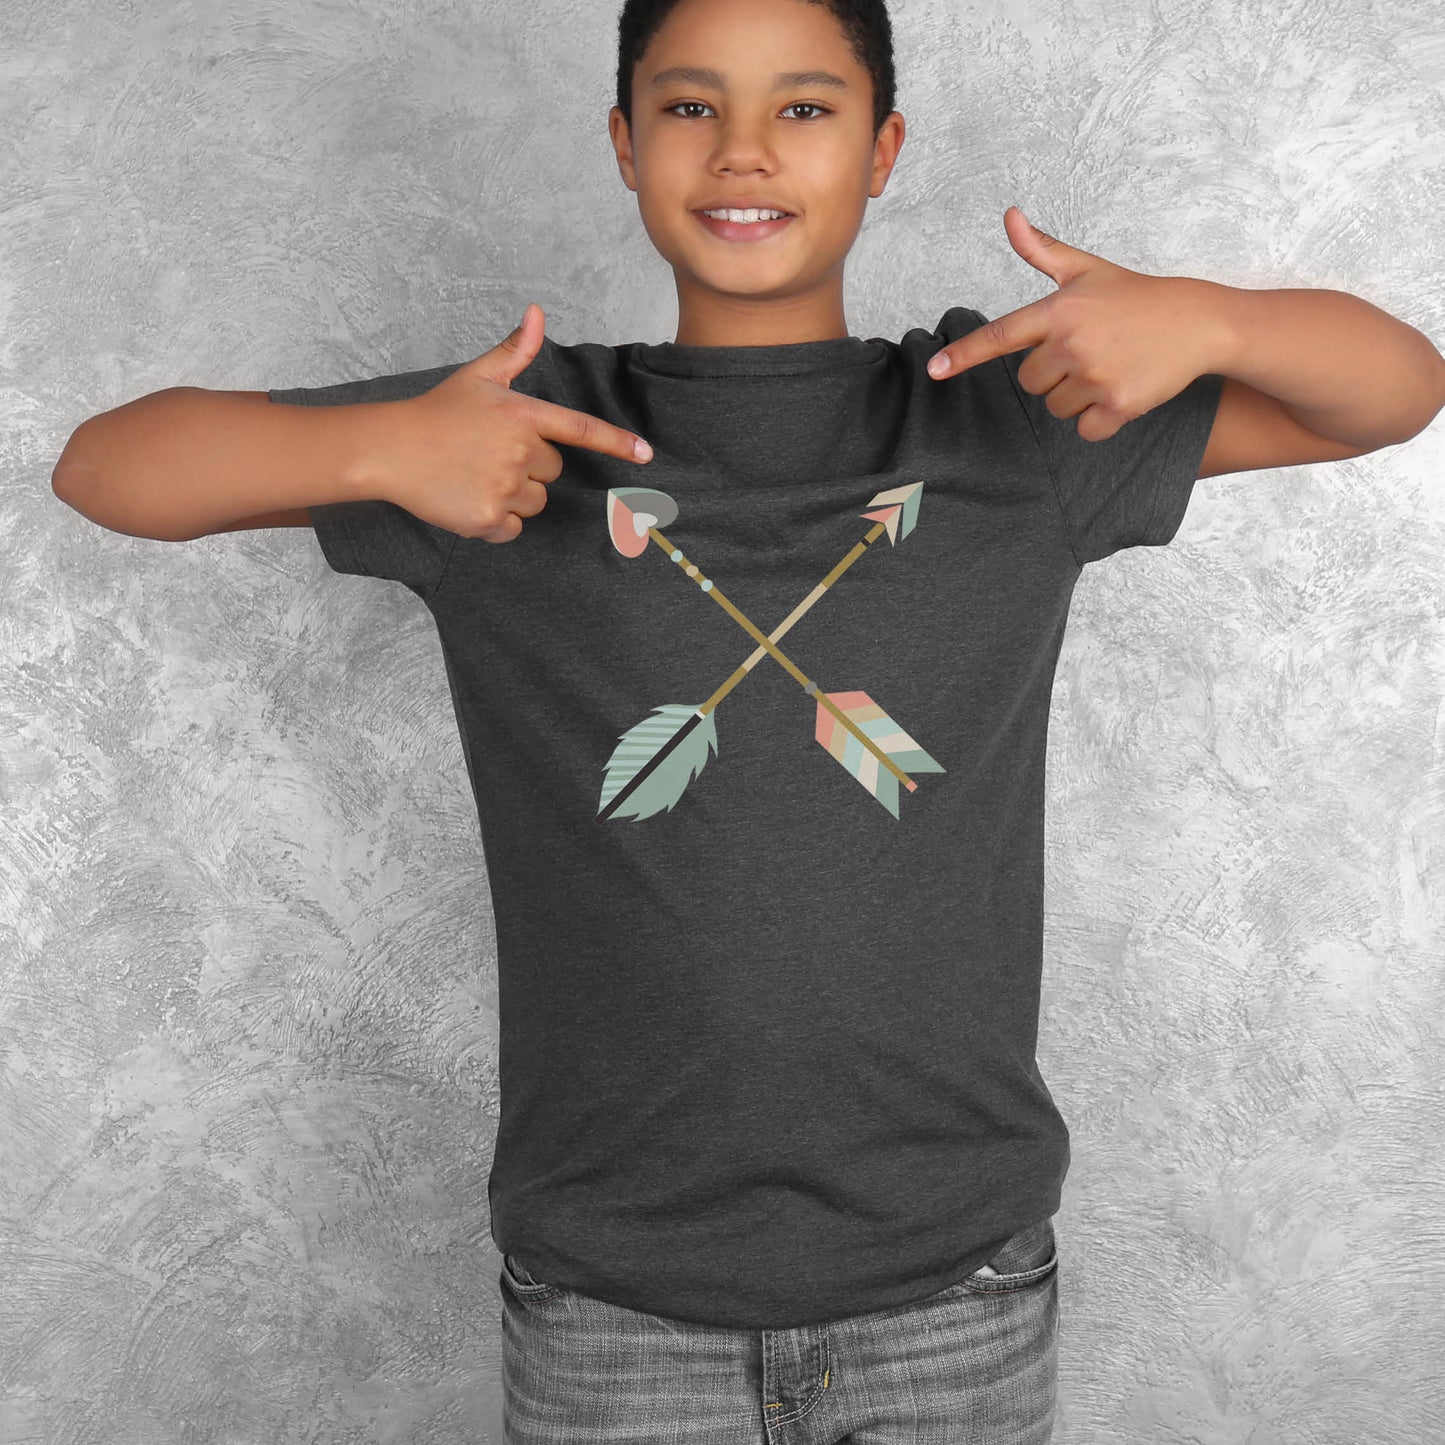 Young boy wearing a matching mommy-and-me Youth size t-shirt in heather dark gray with teal blue criss-cross boho arrows, to match Christian homeschool mom's / women's "Raising Arrows" Psalm 127:4-5 bible verse t-shirt